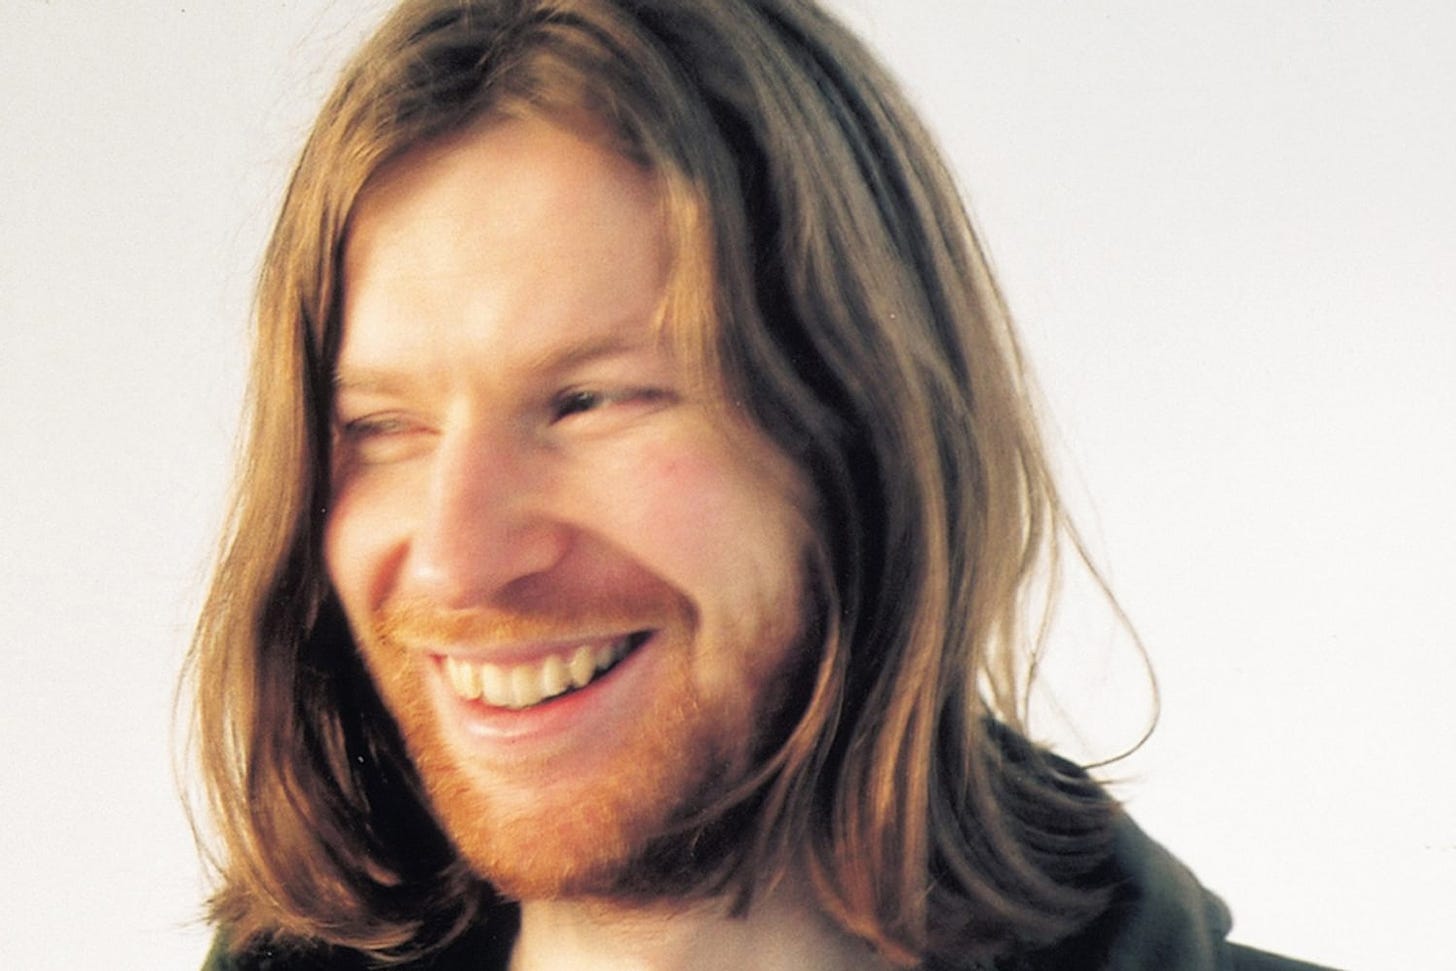 Aphex Twin shares music from his six-year old son • News • DIY Magazine